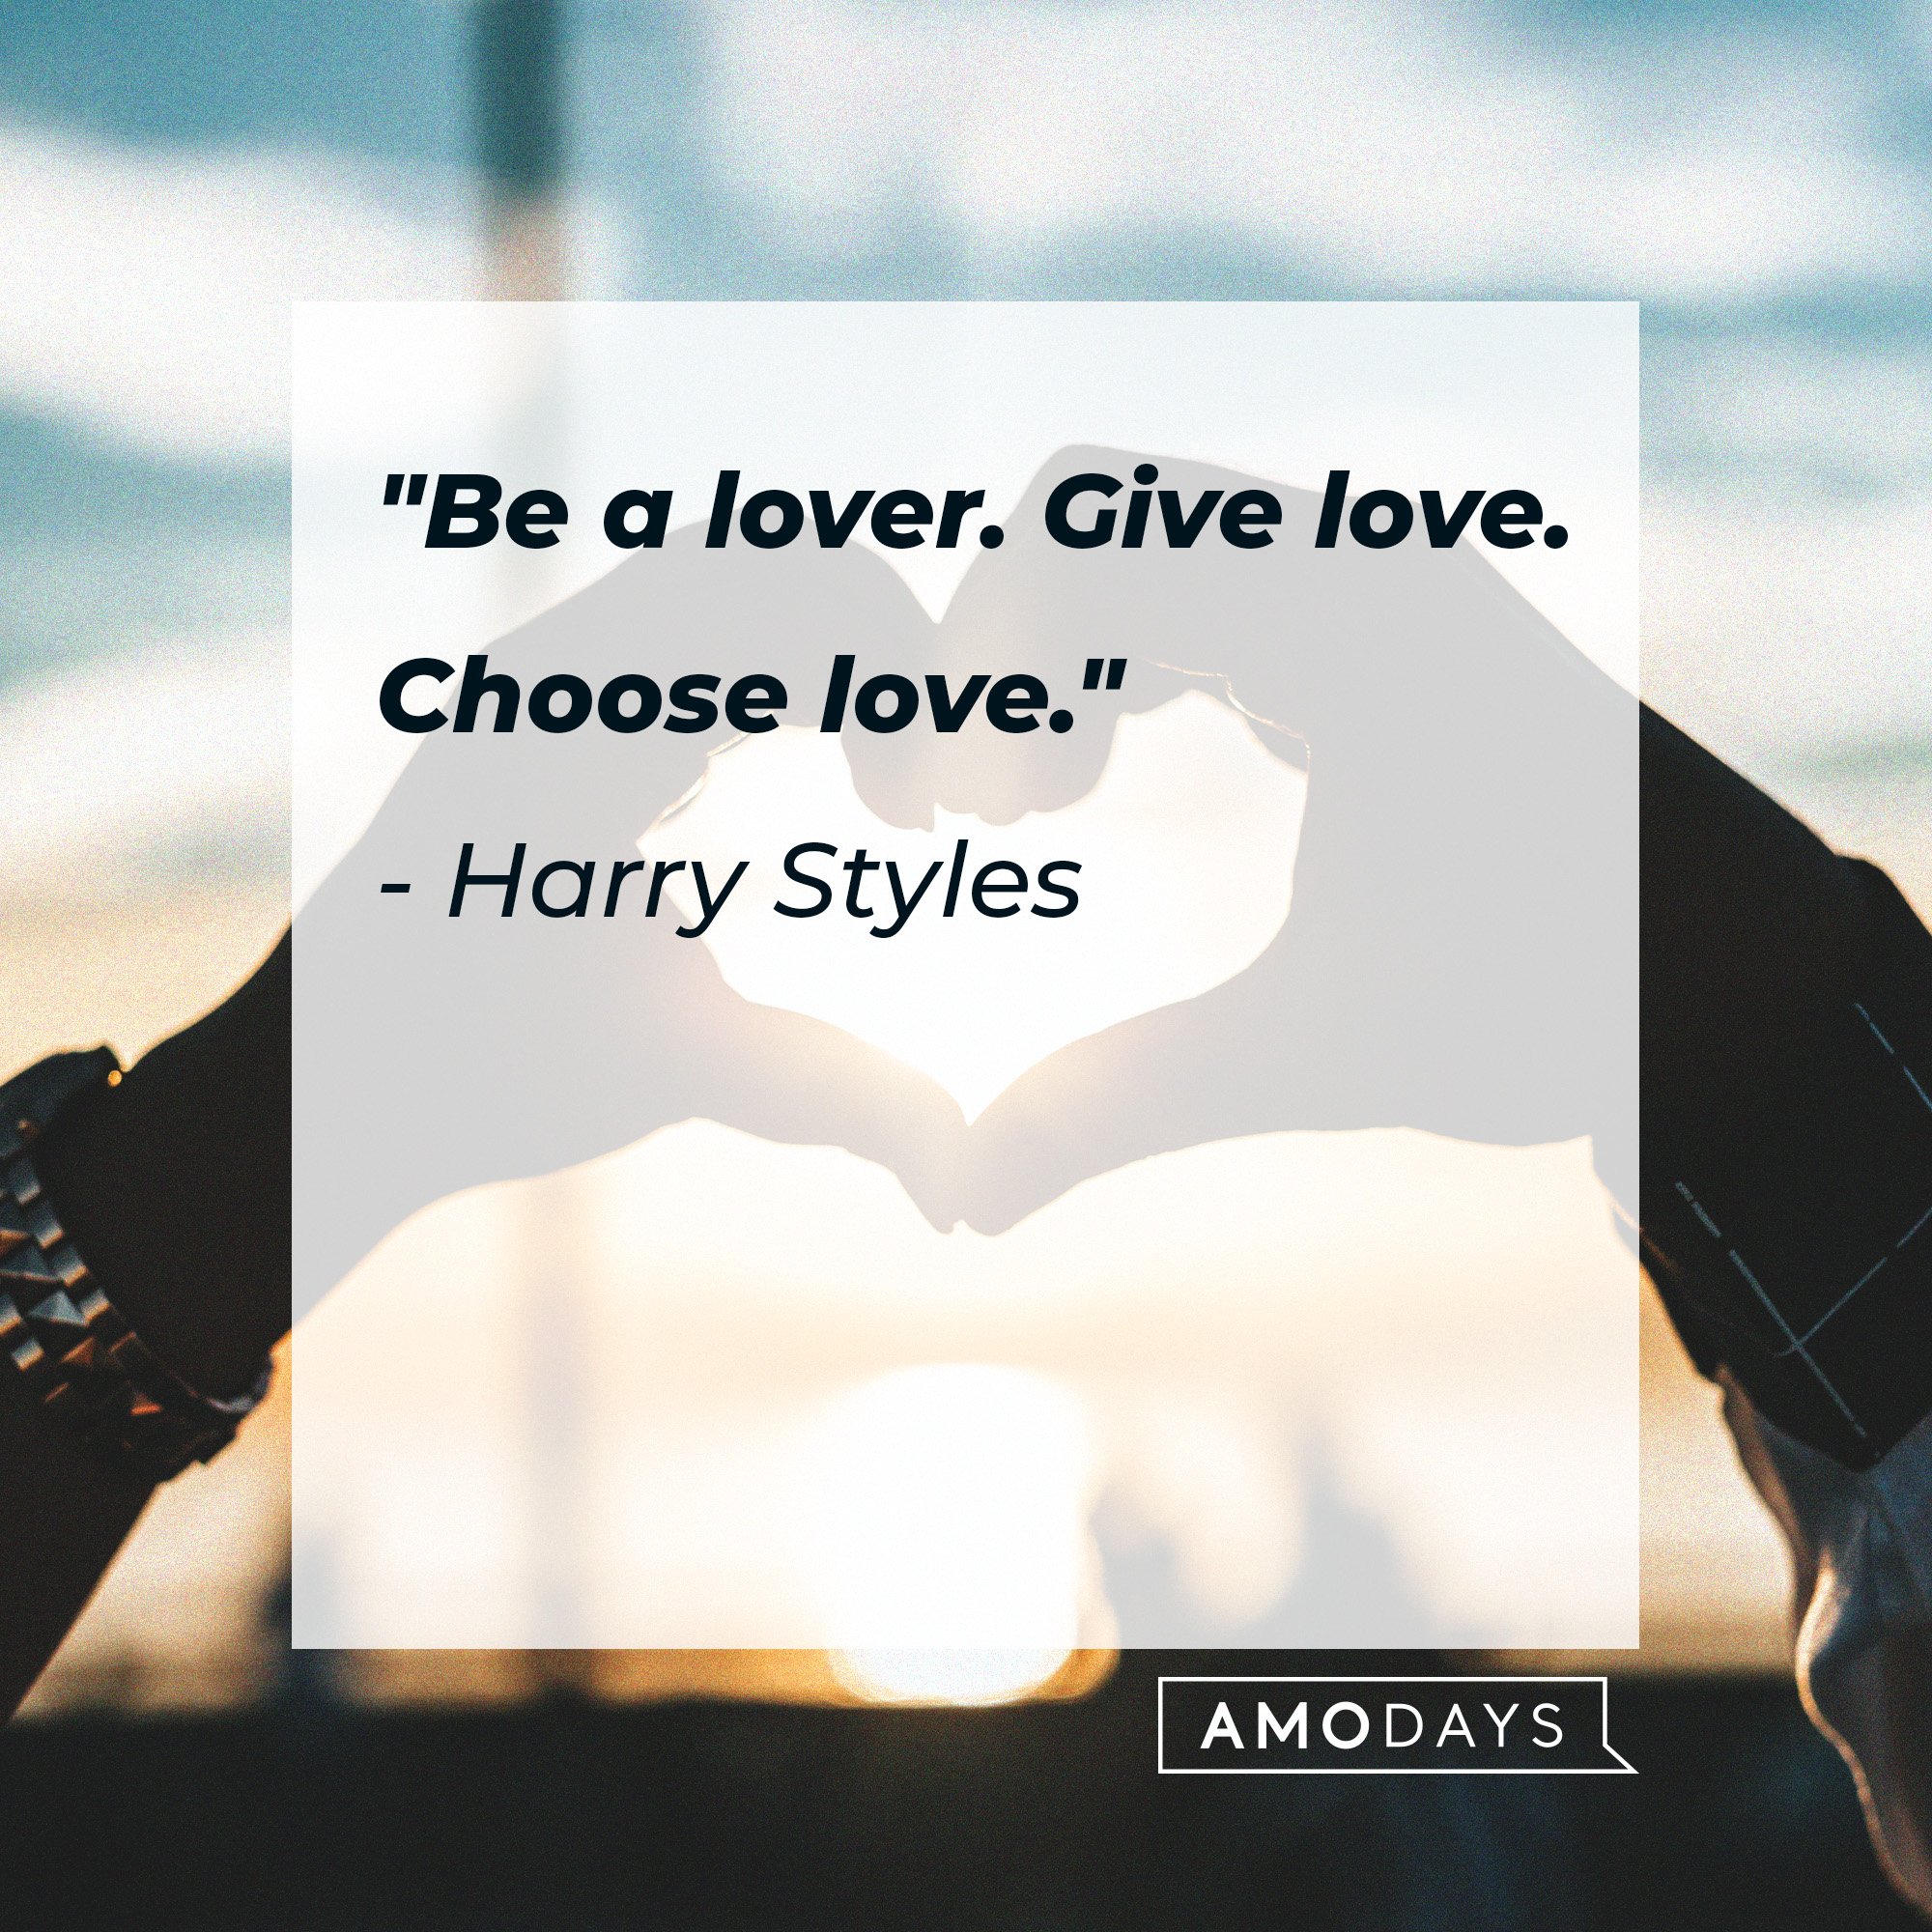 Harry Styles’s quote: "Be a lover. Give love. Choose love." |  Source: AmoDays